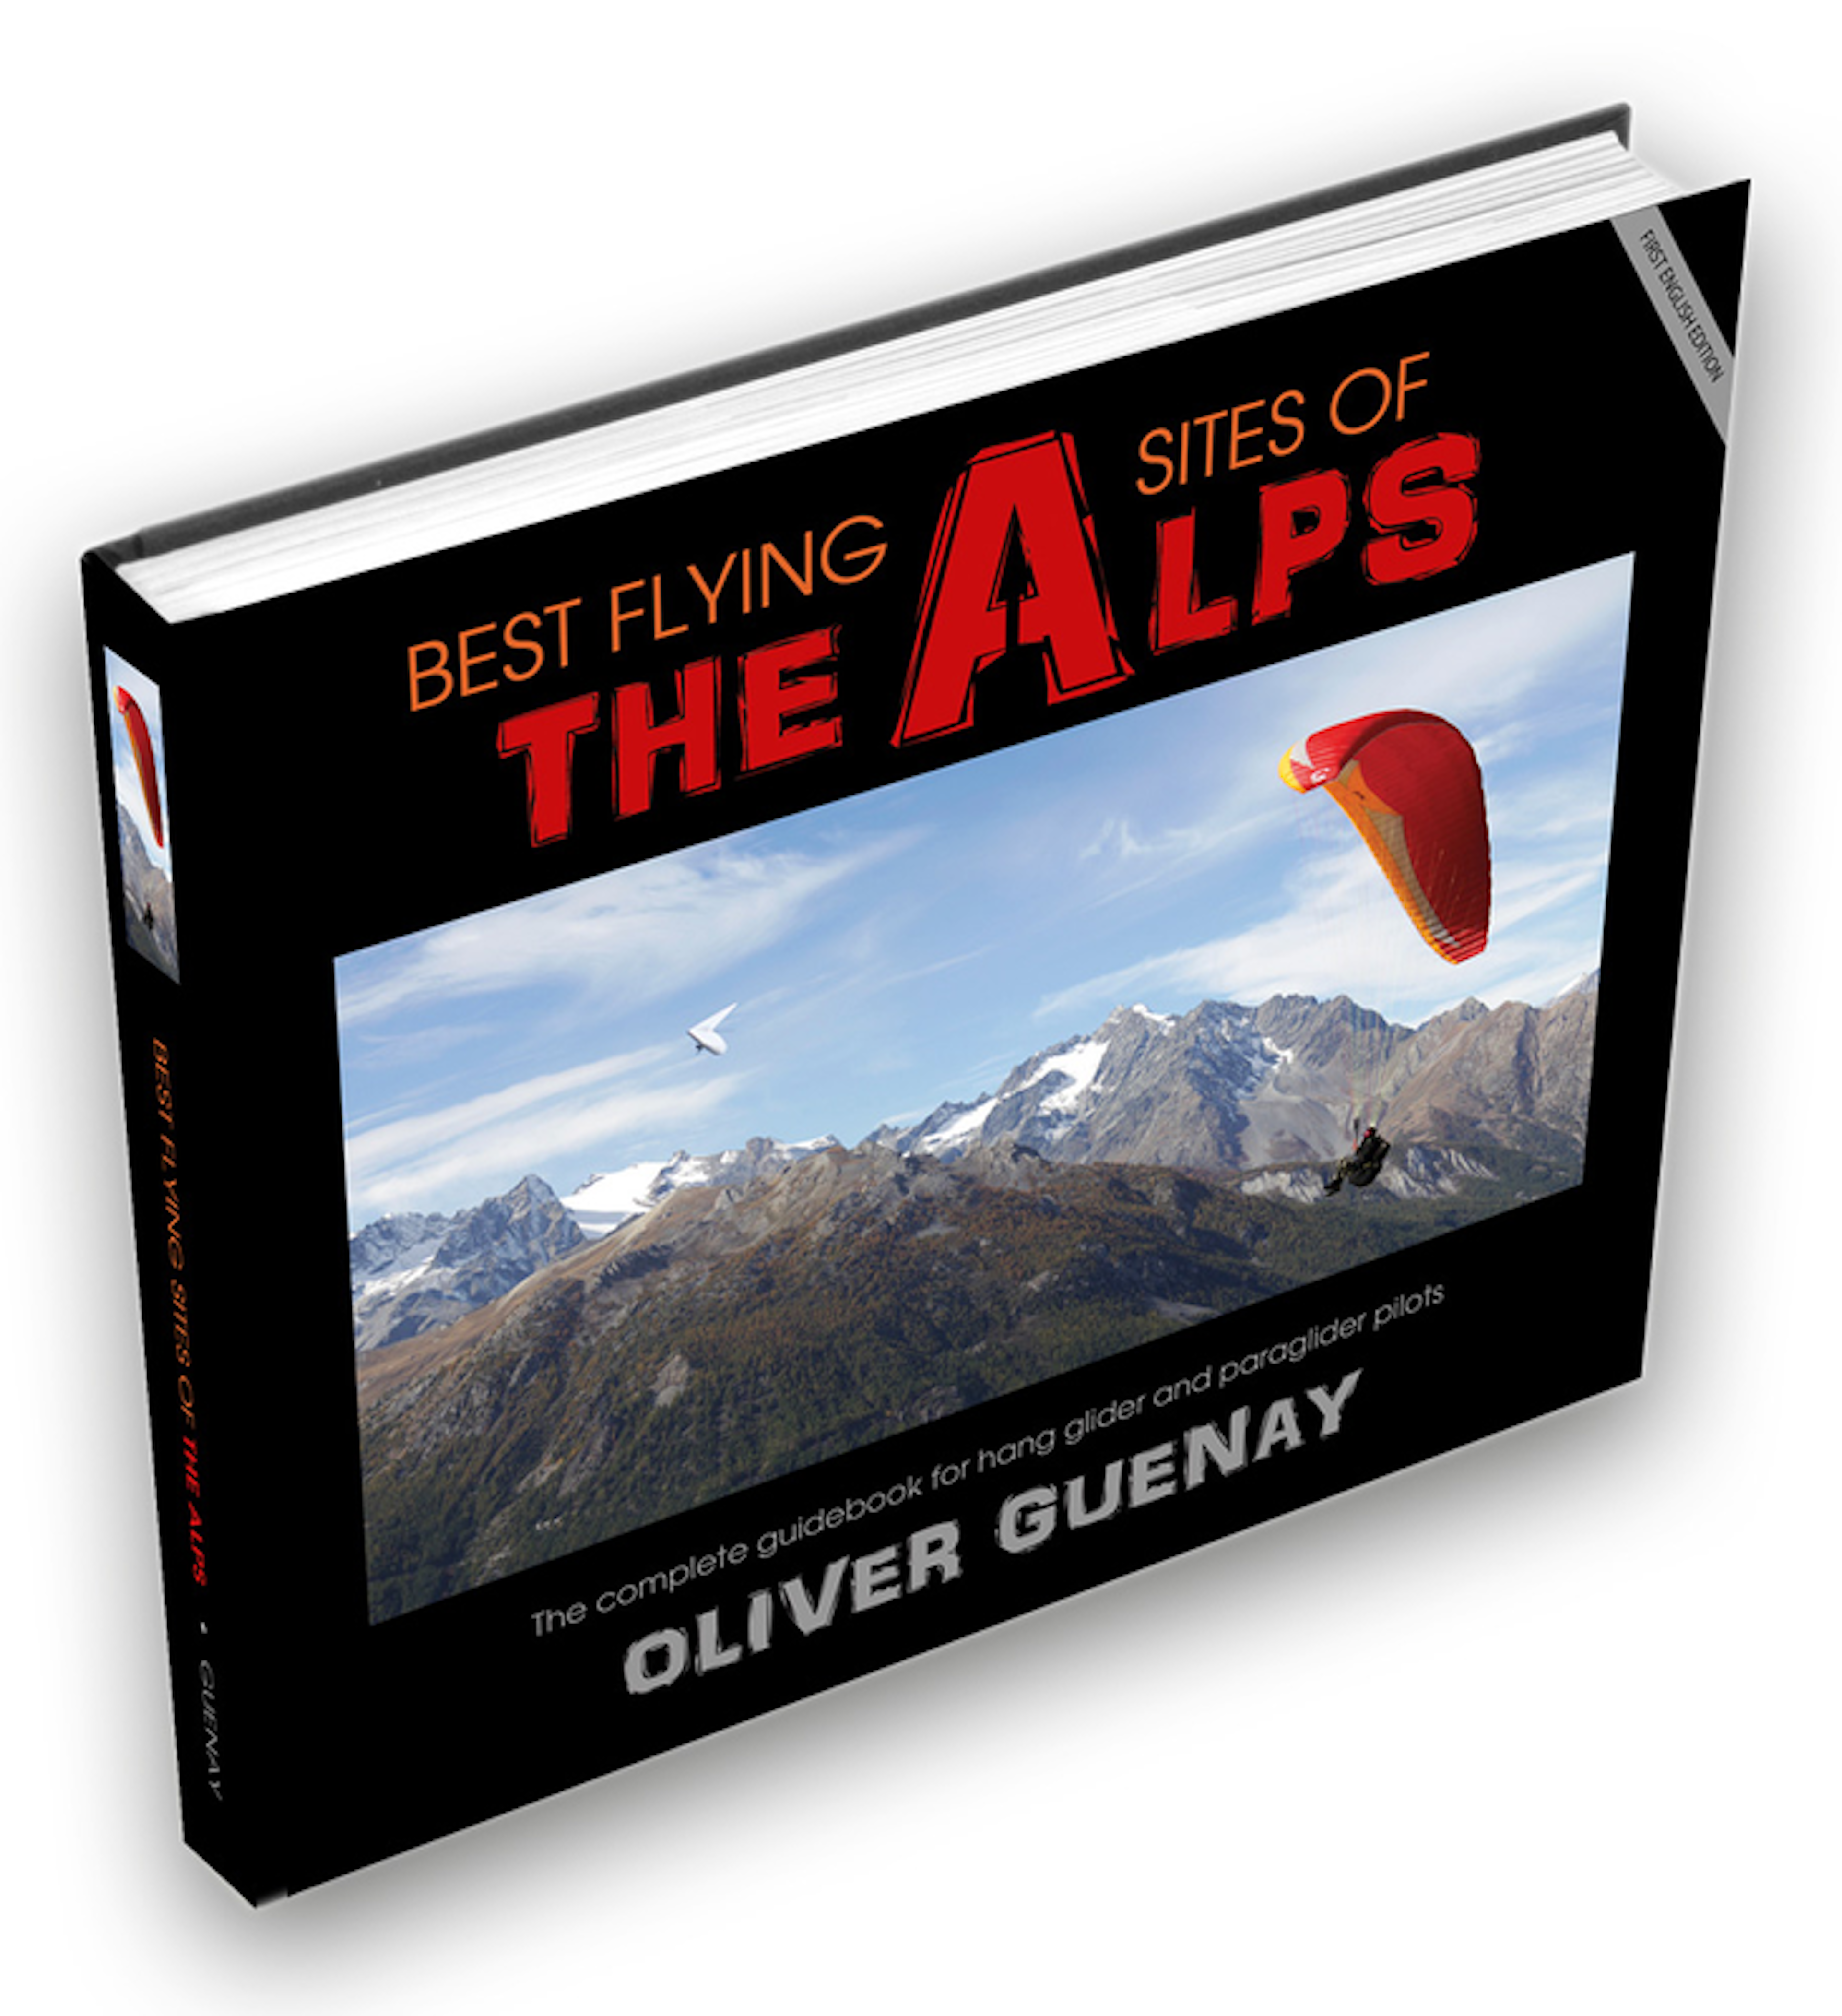 Best Flying Sites of the ALPS (Digital) 